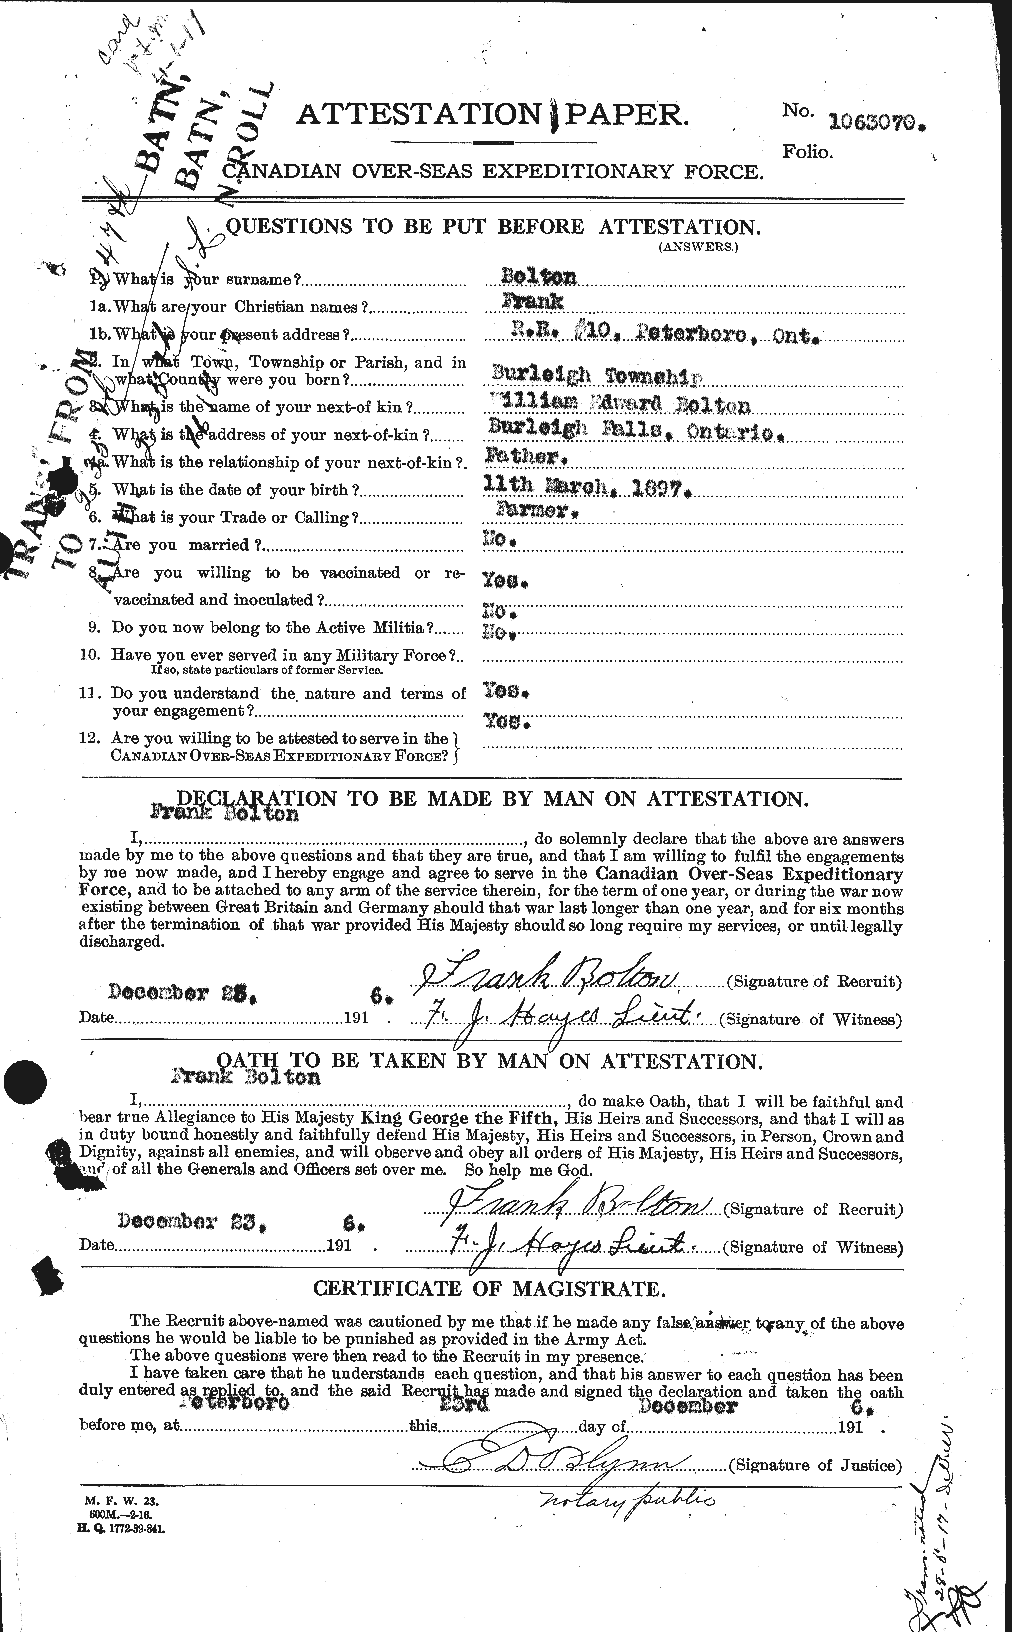 Personnel Records of the First World War - CEF 250005a